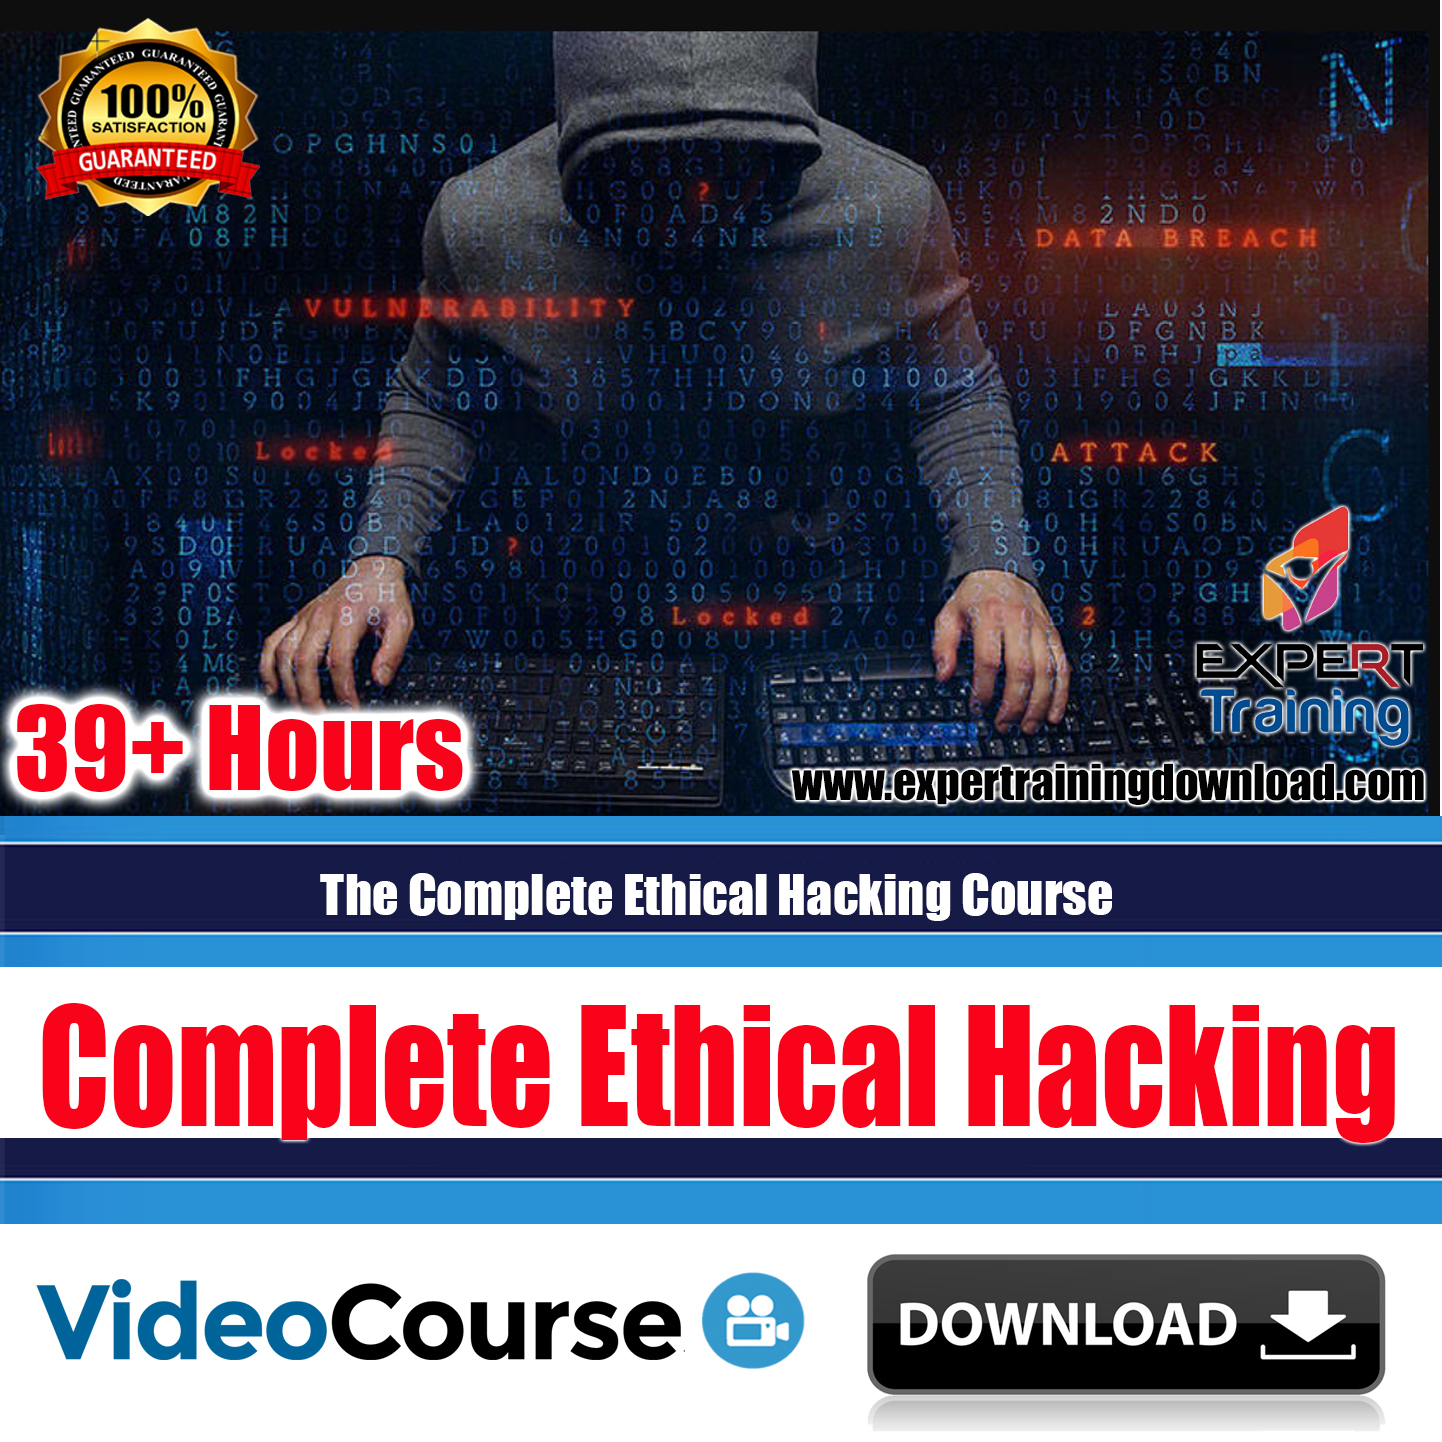 The Complete Ethical Hacking (39+ Hours) Course